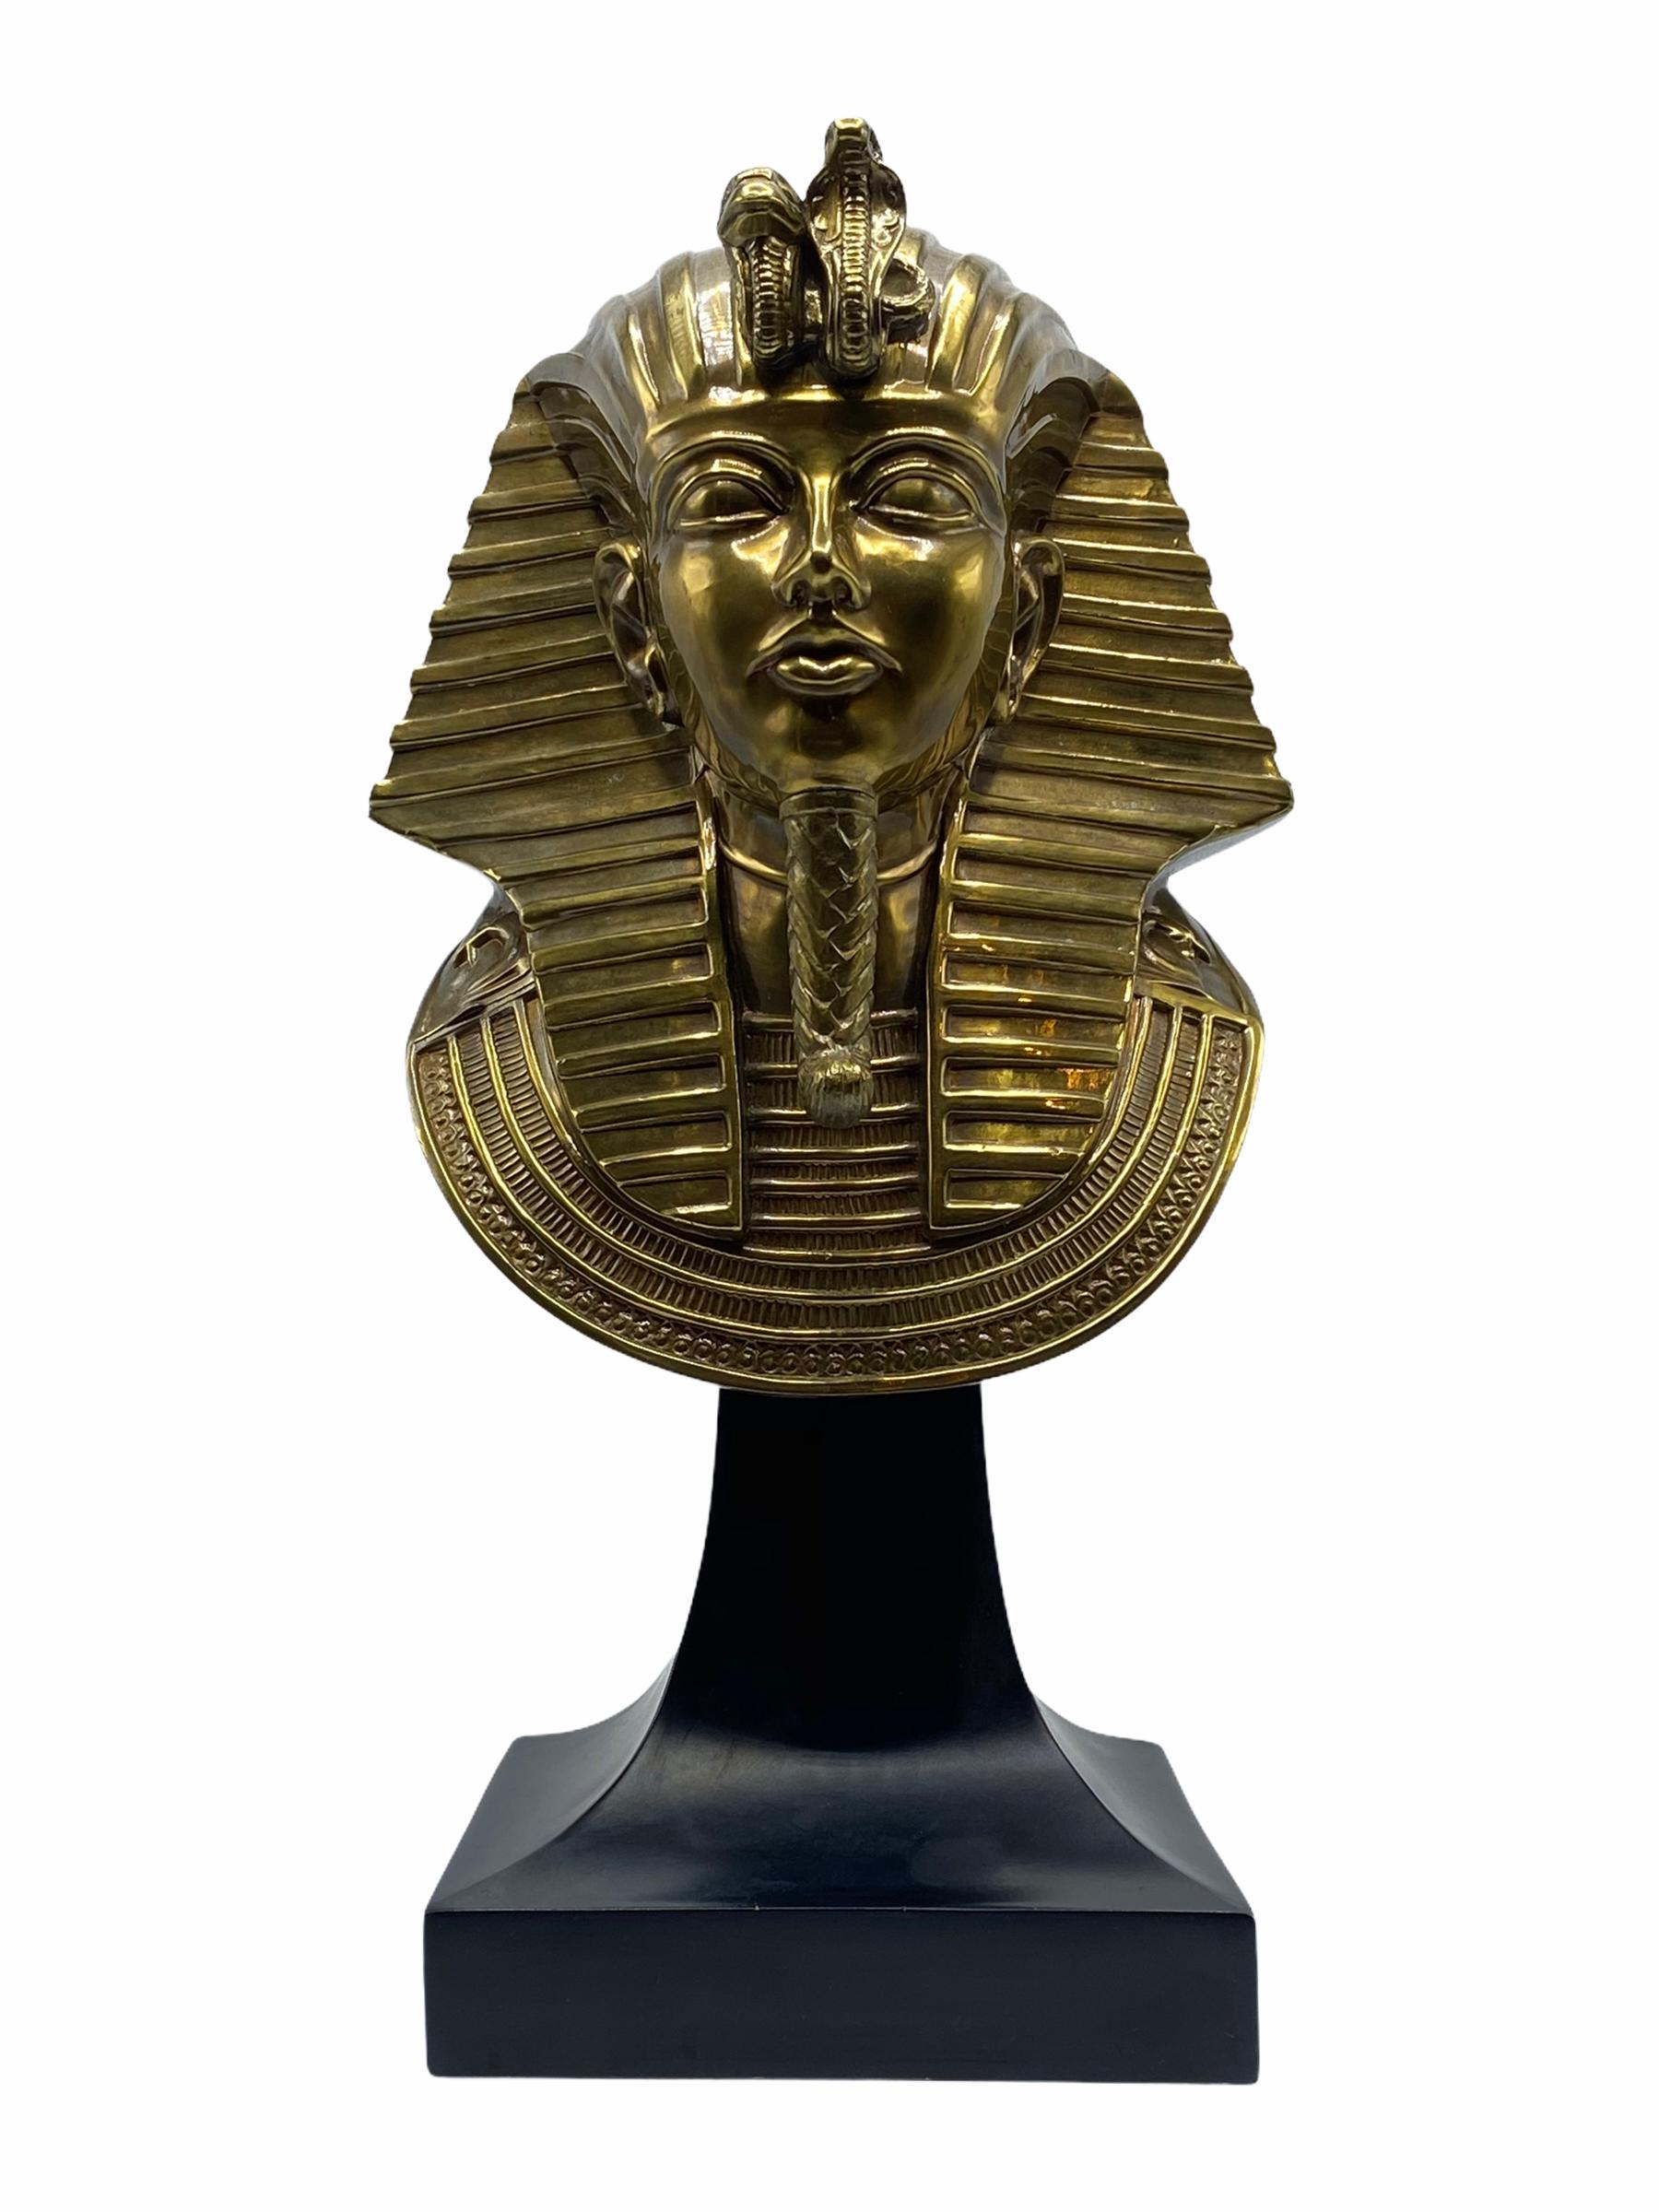 Egyptian Revival King Tut bronze bust sculpture on a black painted composition base.
Very nice casting.